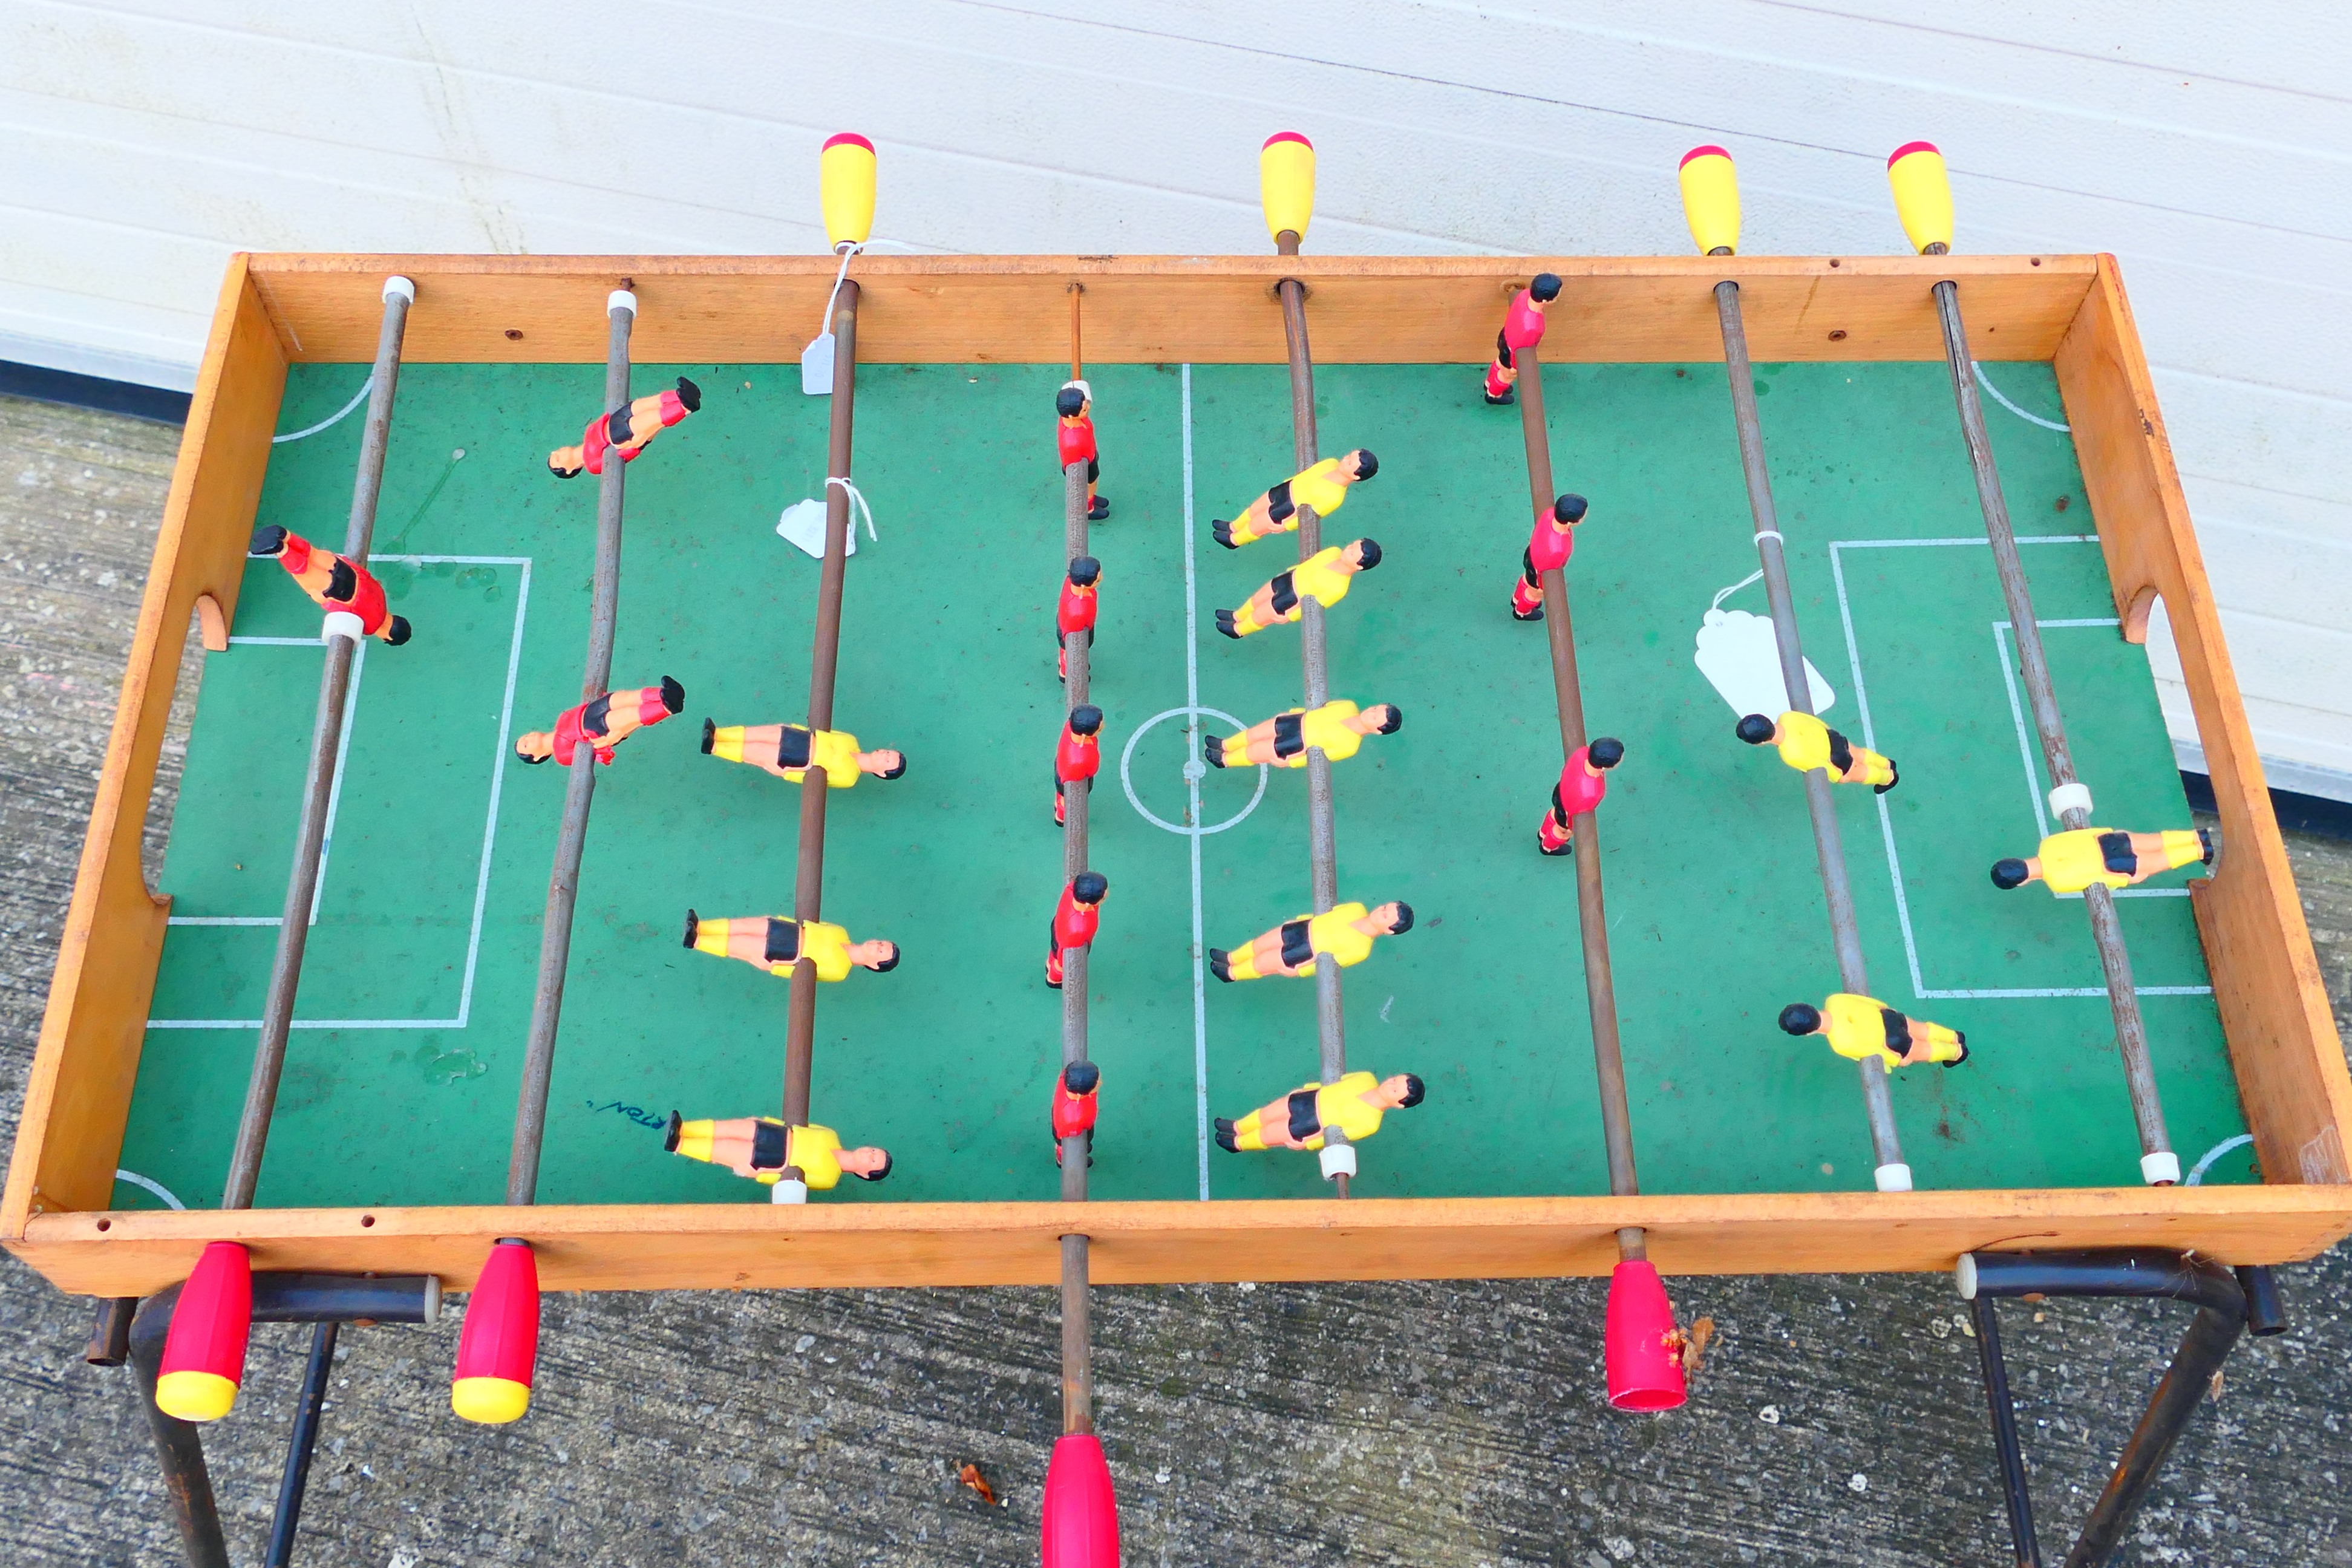 A vintage table football game. - Image 2 of 2